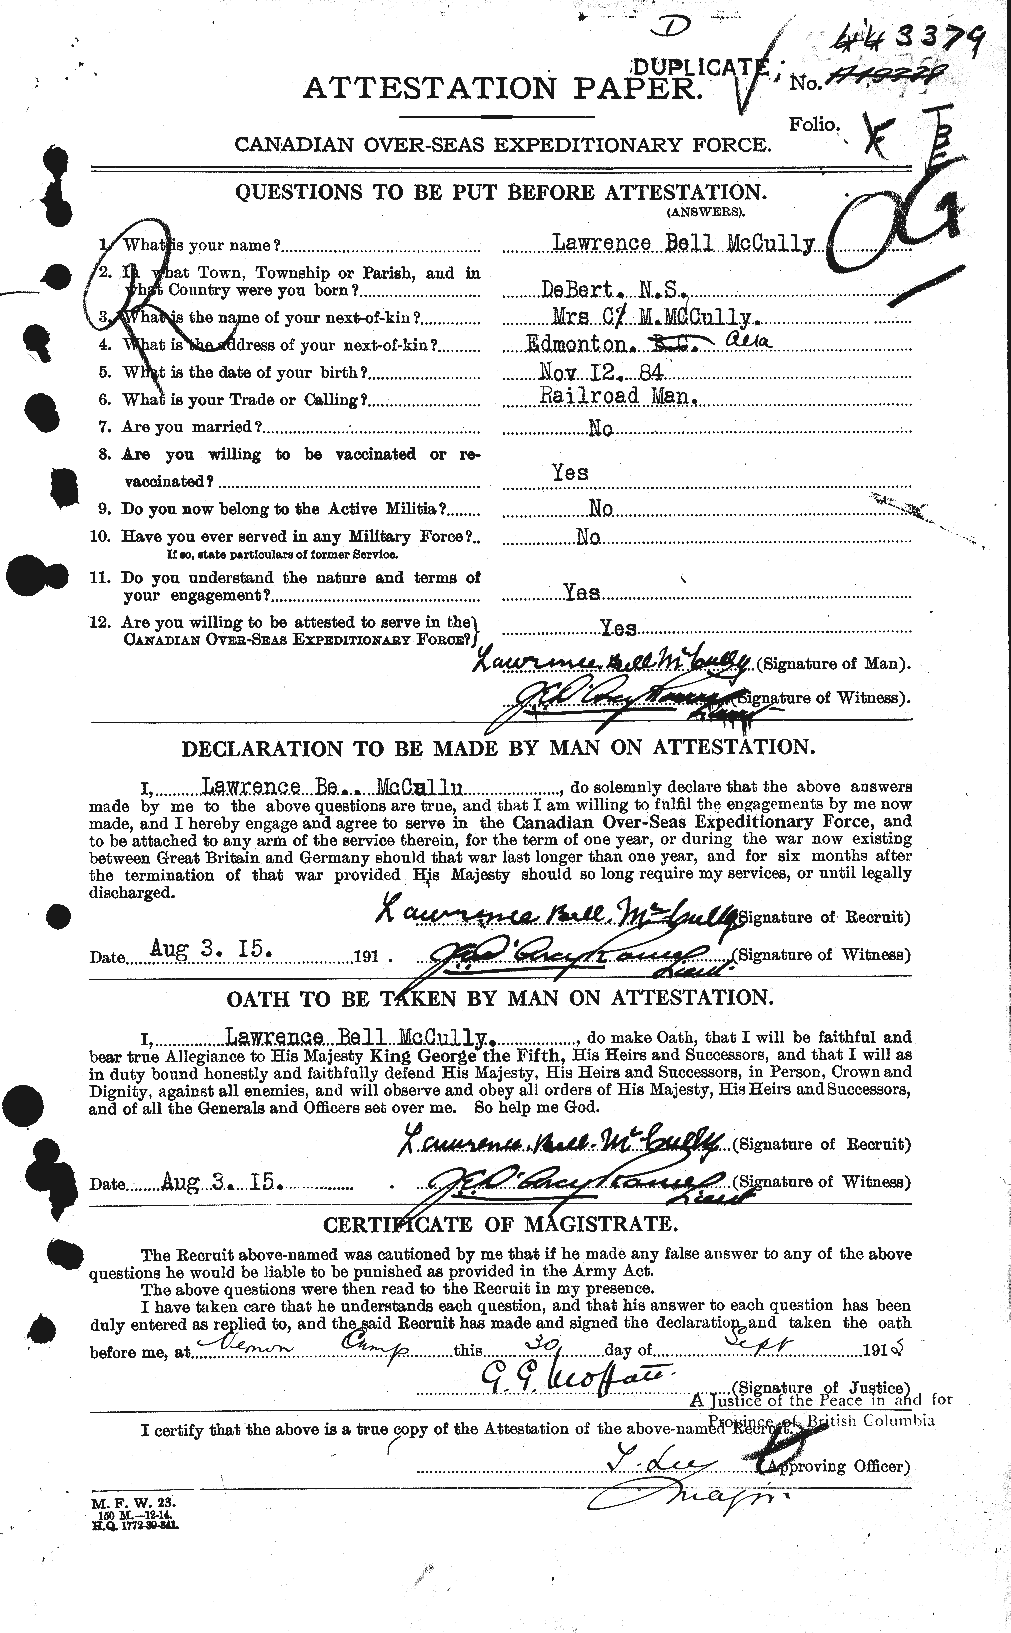 Personnel Records of the First World War - CEF 136819a